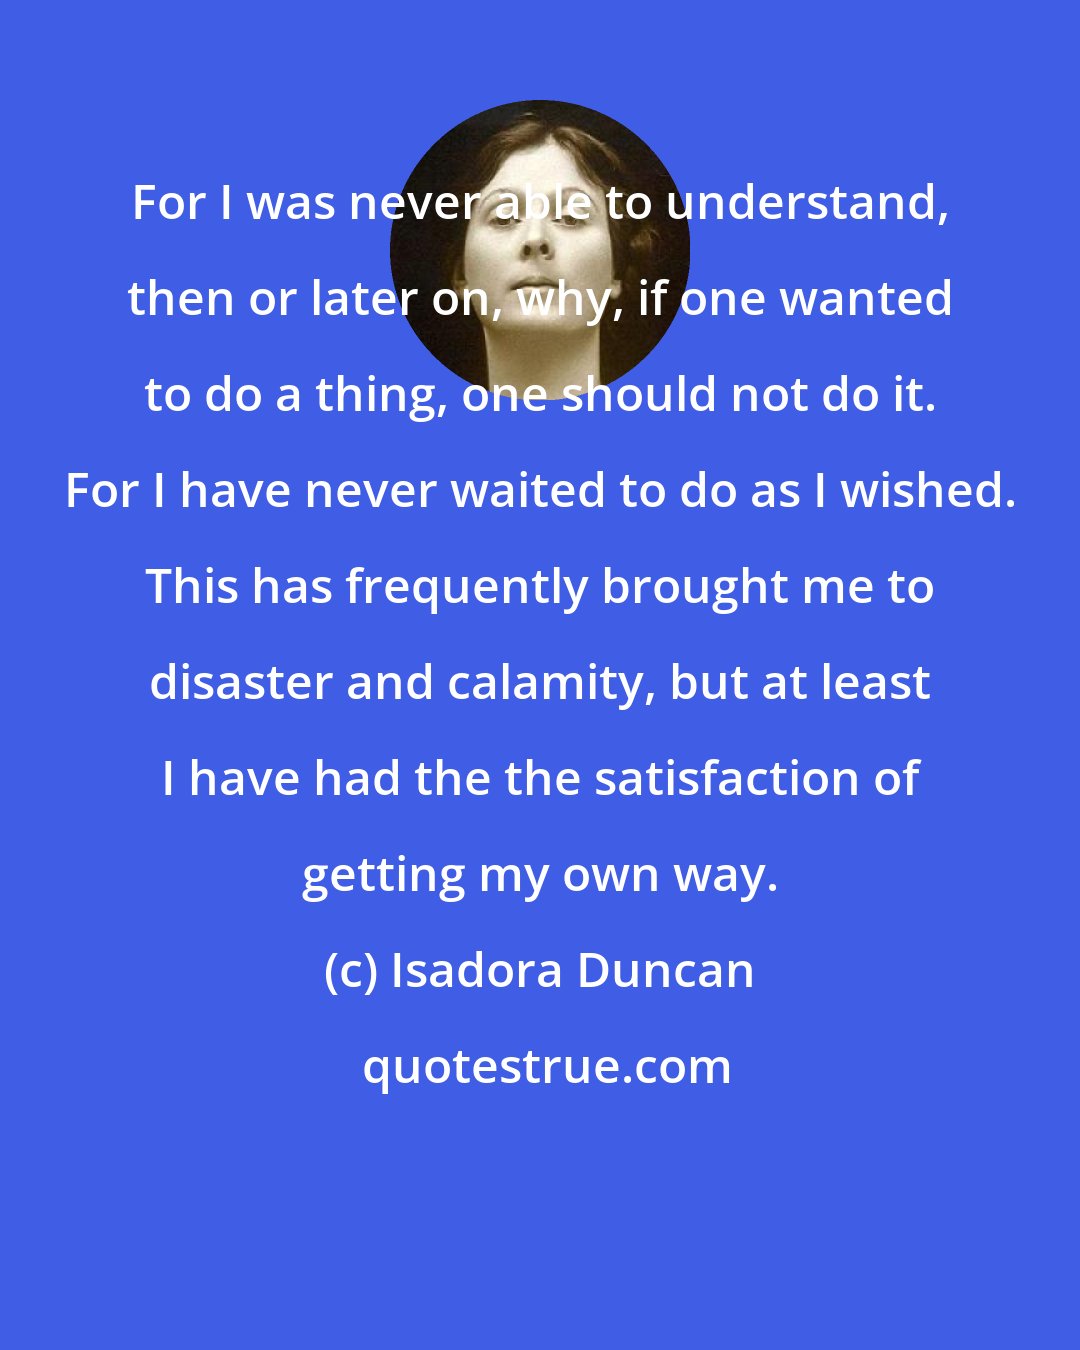 Isadora Duncan: For I was never able to understand, then or later on, why, if one wanted to do a thing, one should not do it. For I have never waited to do as I wished. This has frequently brought me to disaster and calamity, but at least I have had the the satisfaction of getting my own way.